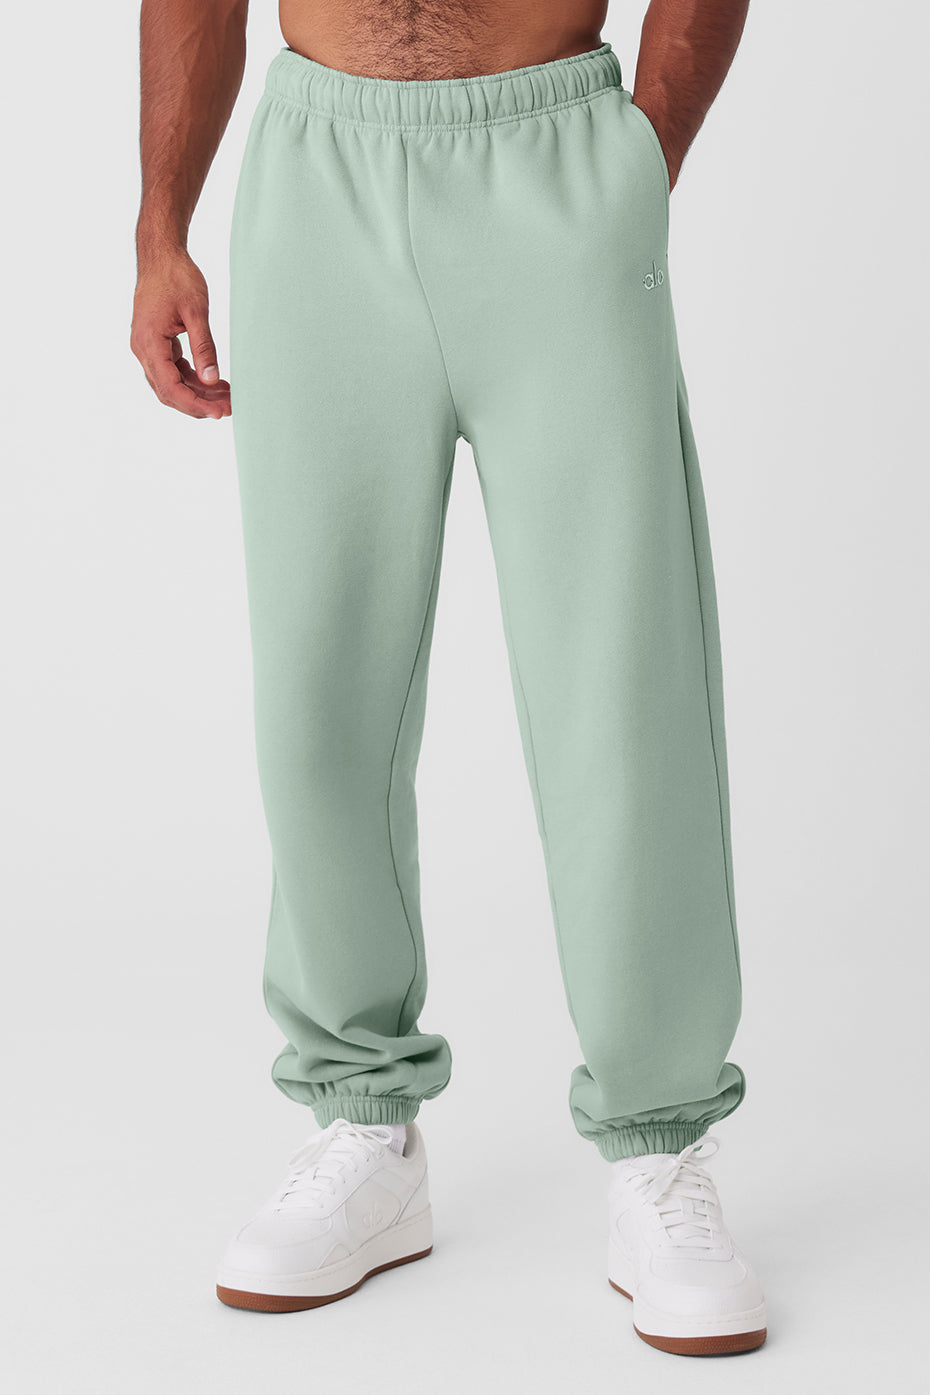 Accolade Sweatpant - Icy Sage - Icy Sage / XS